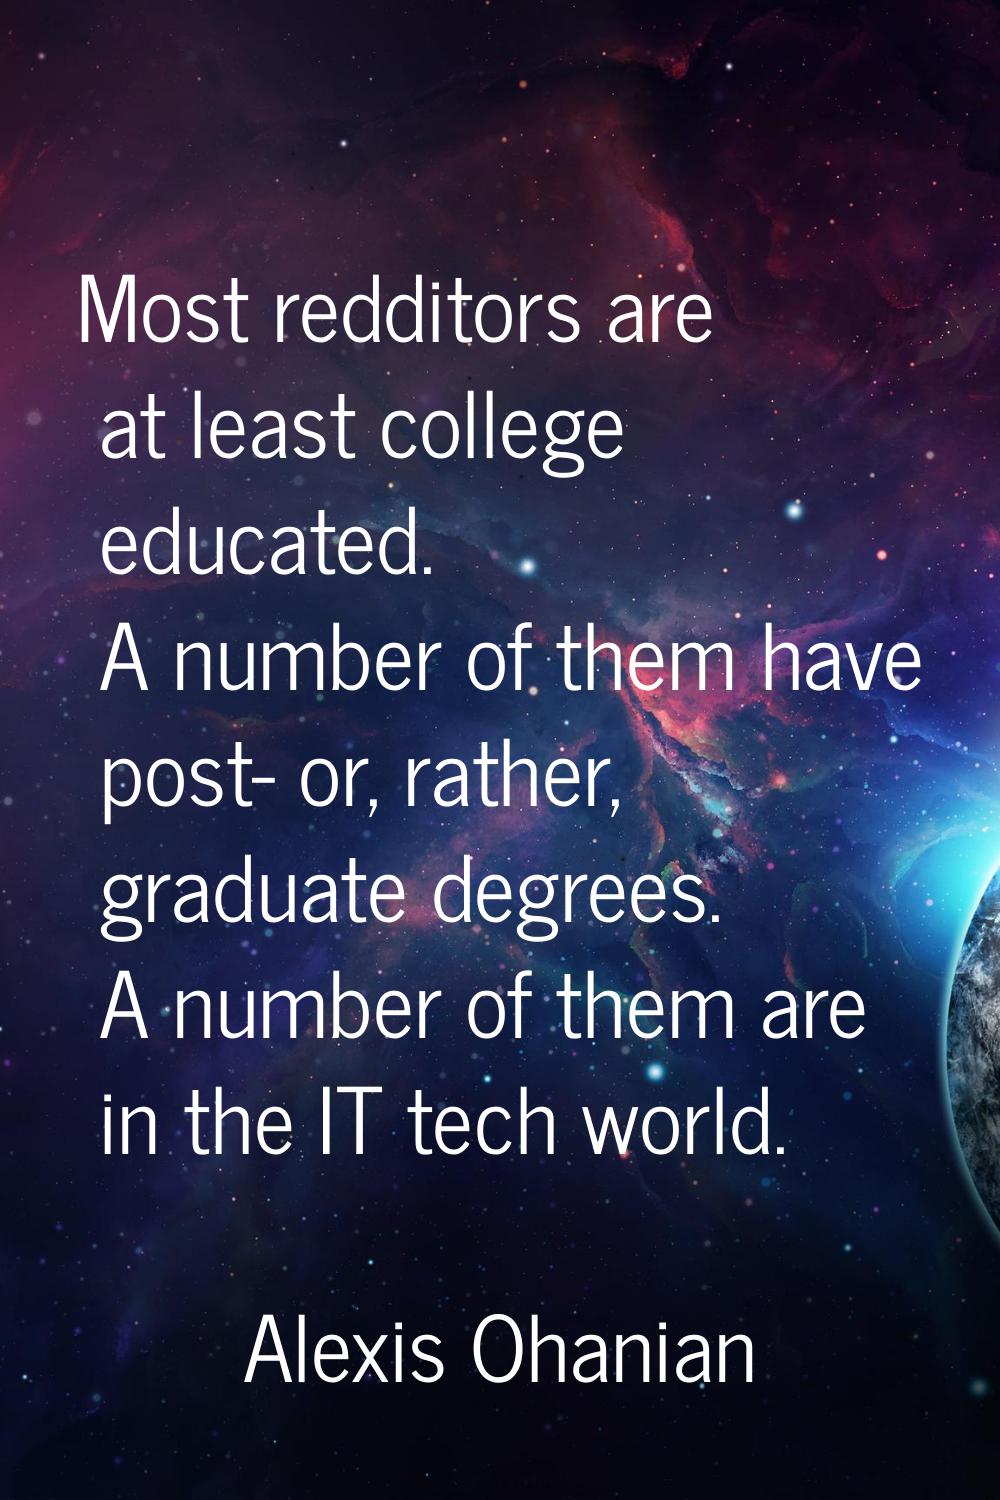 Most redditors are at least college educated. A number of them have post- or, rather, graduate degr